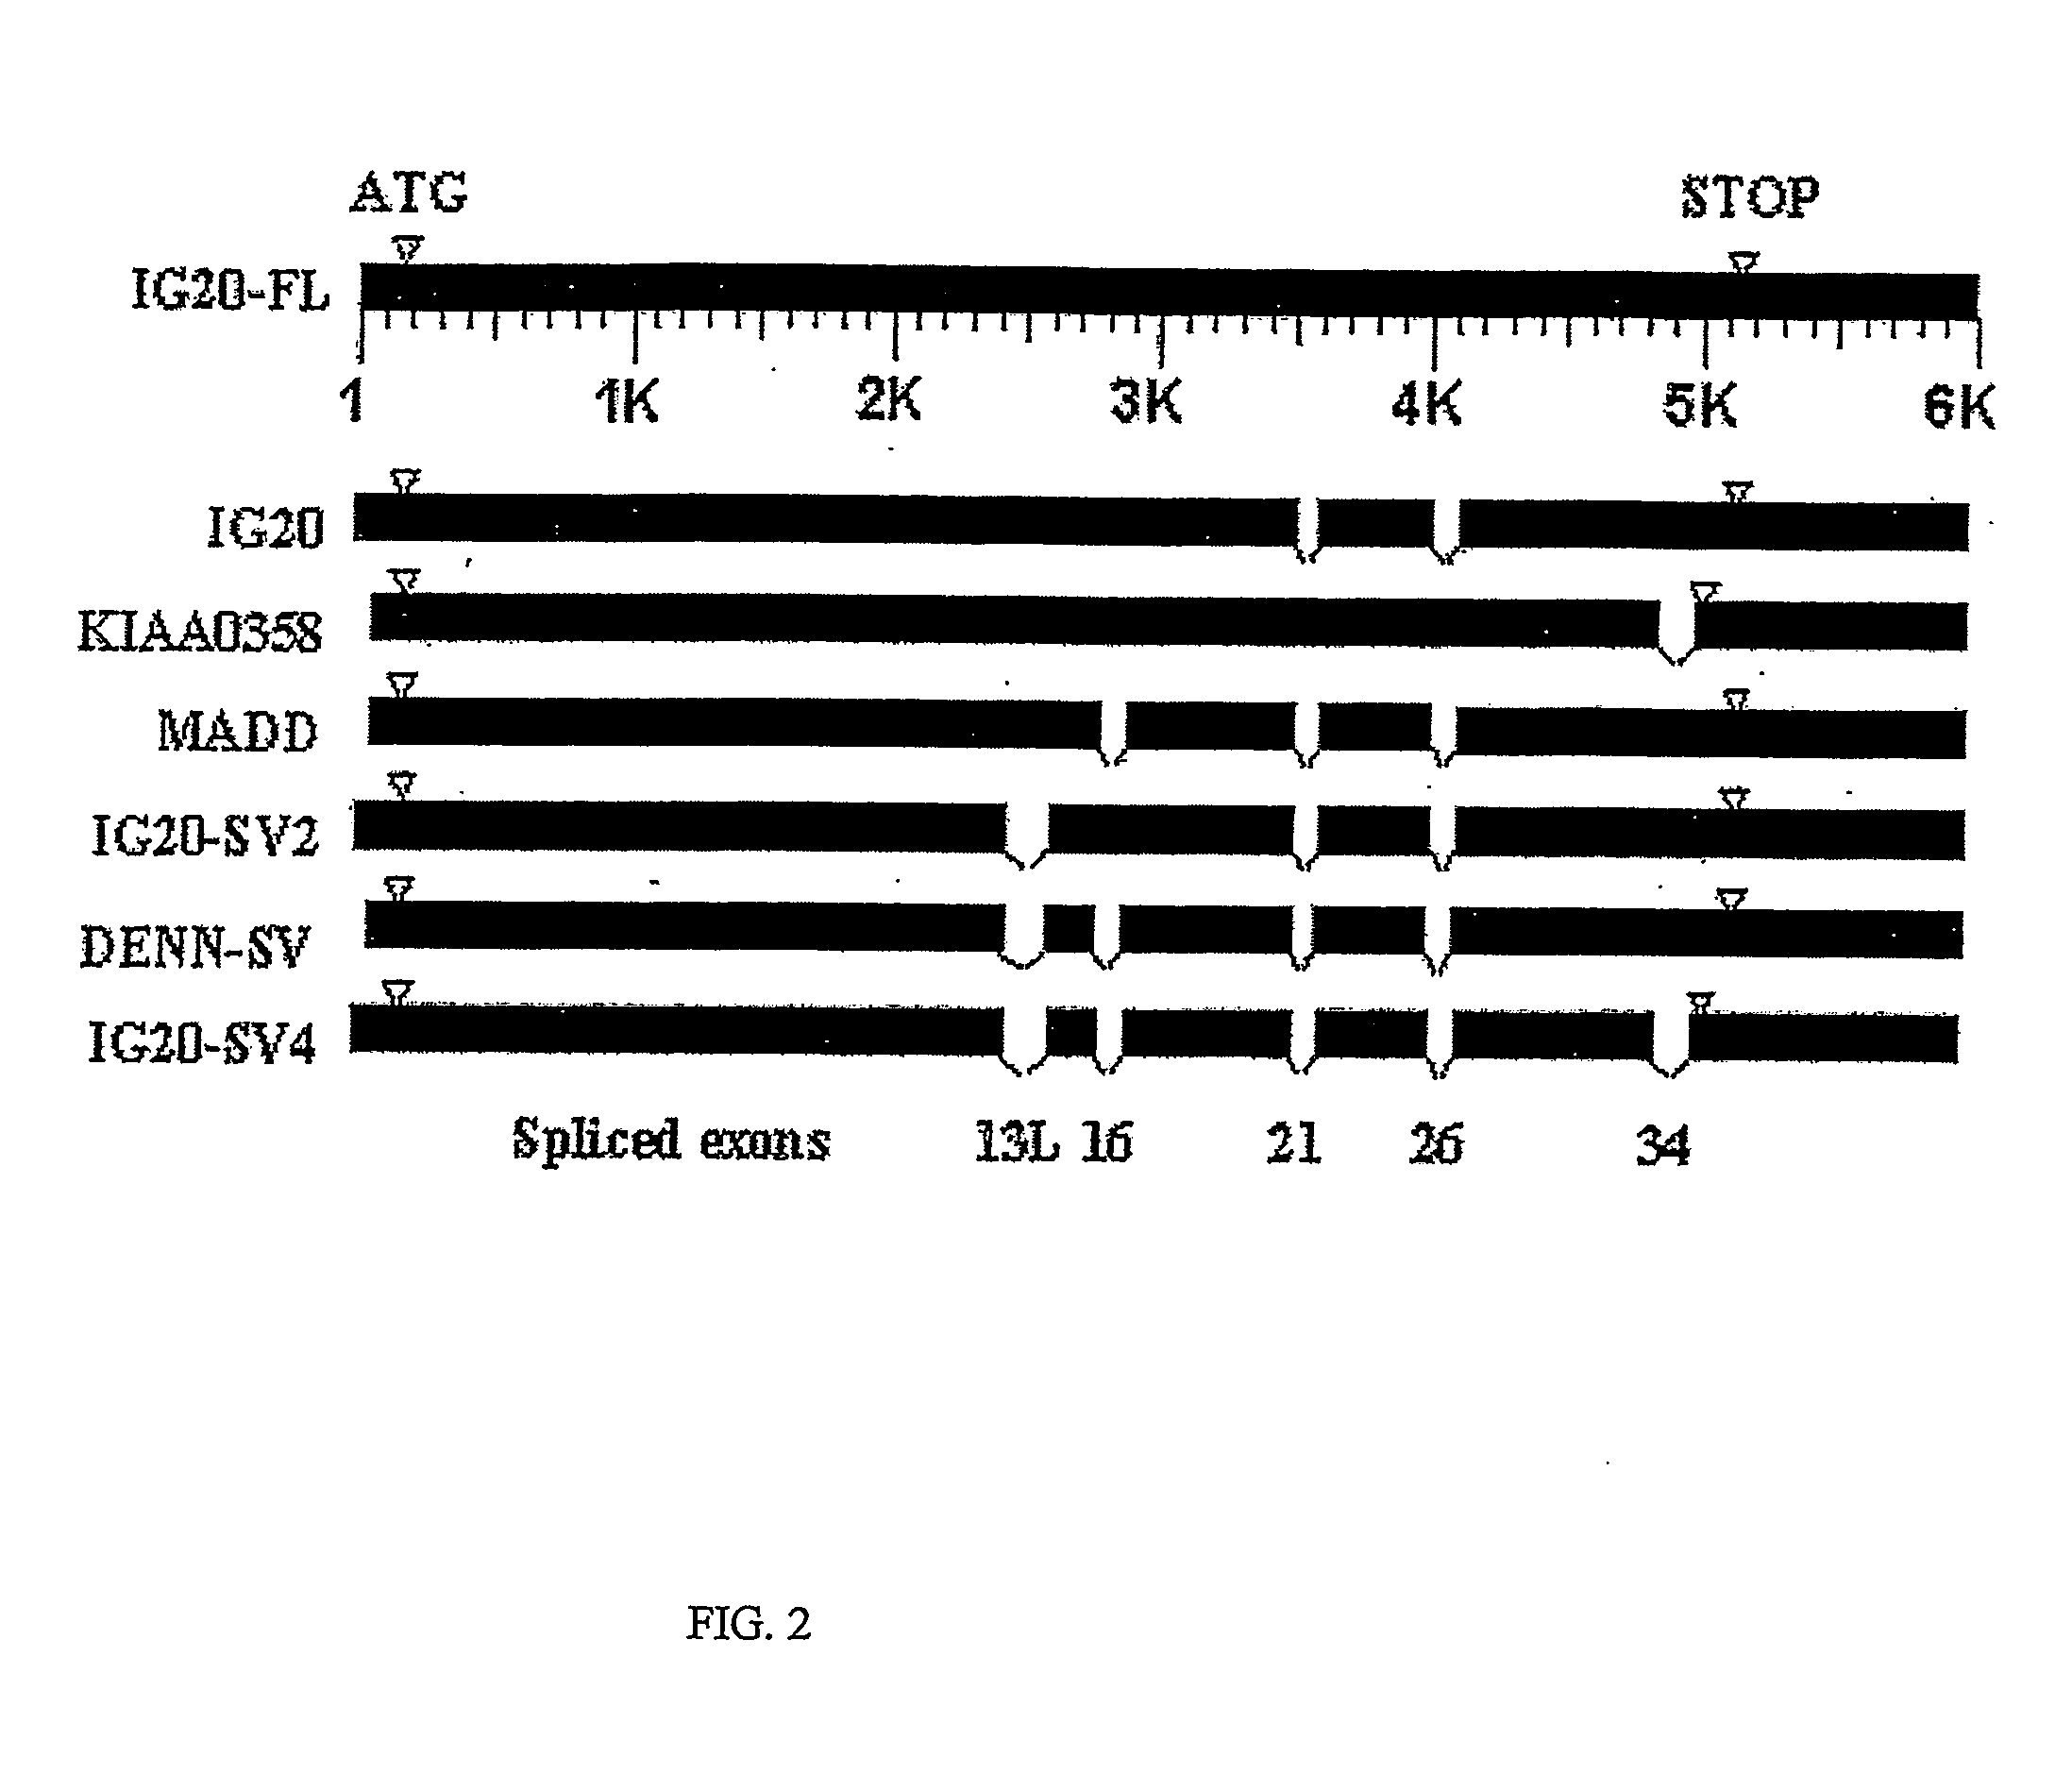 Methods and Compositions of Ig20 and Denn-Sv Splice Variants